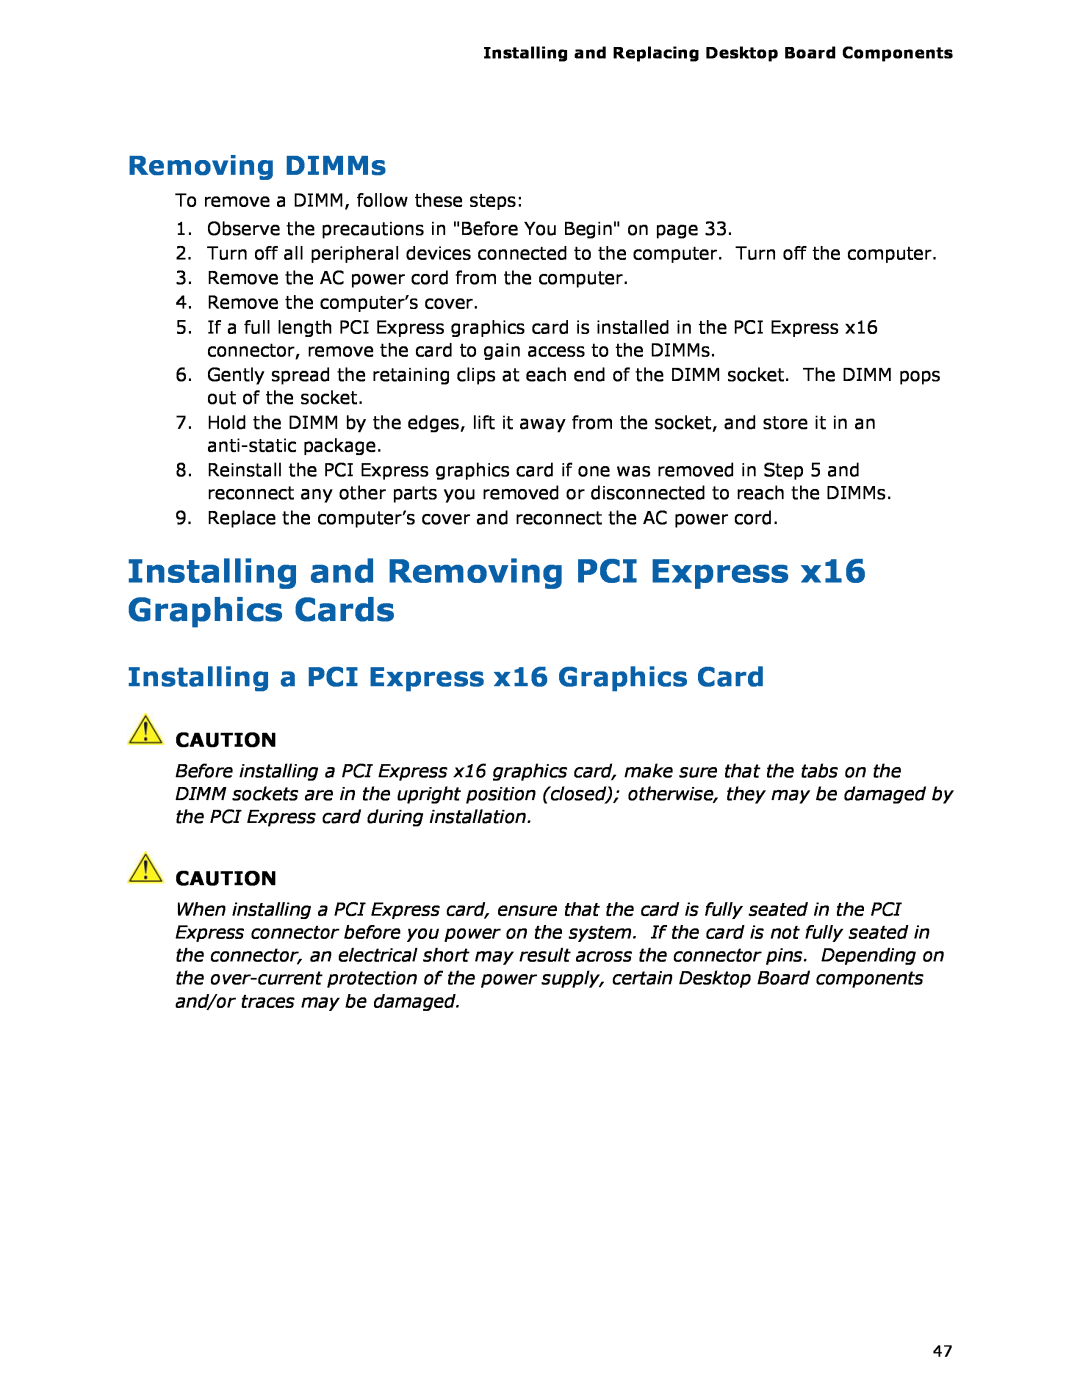 Intel DQ57TM manual Removing DIMMs, Installing a PCI Express x16 Graphics Card 